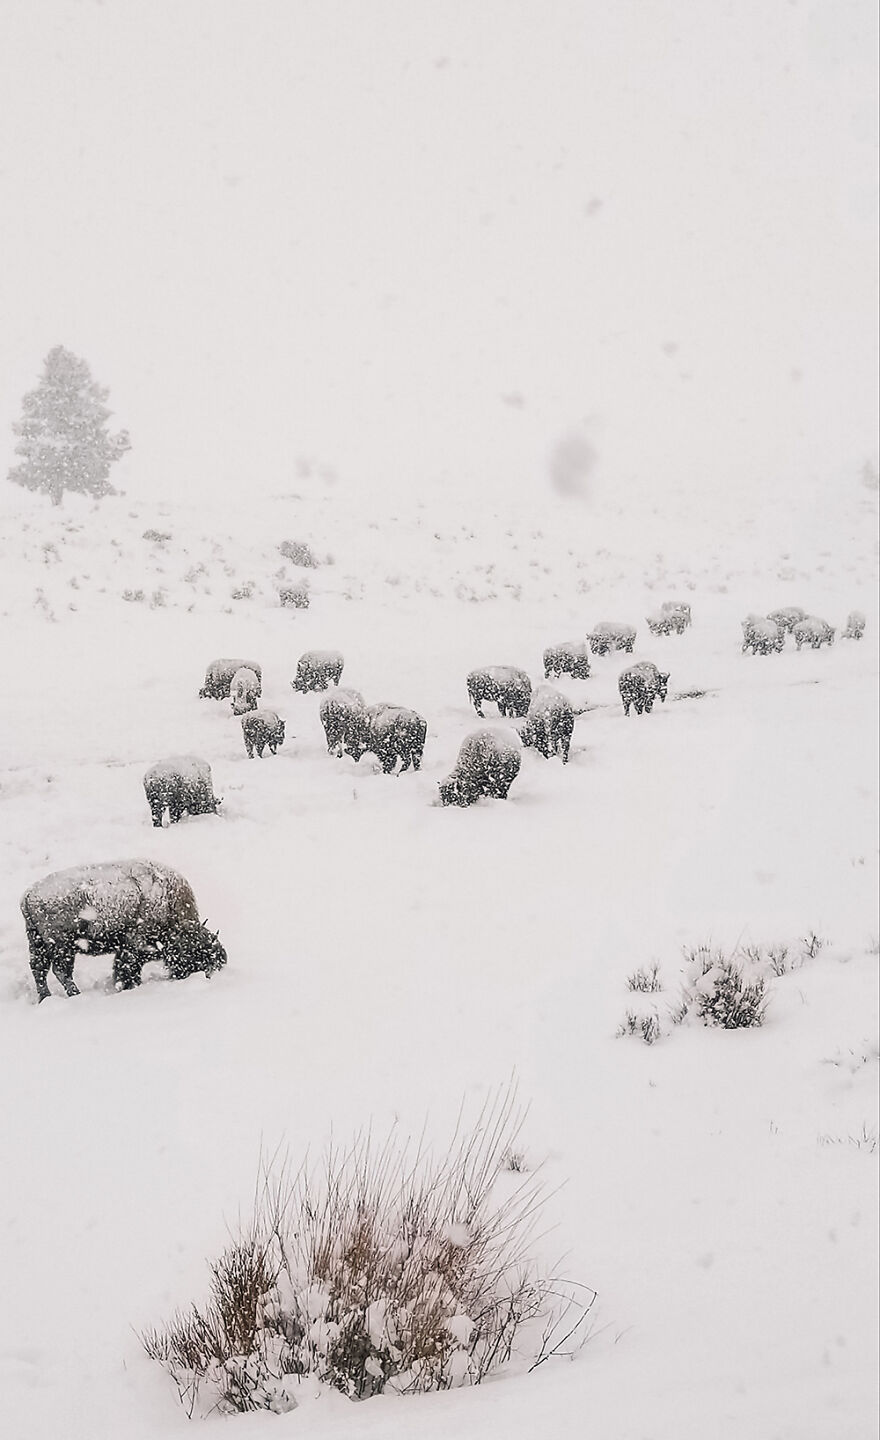 Snowy Bison, Yellowstone National Park By Pamela Puntney